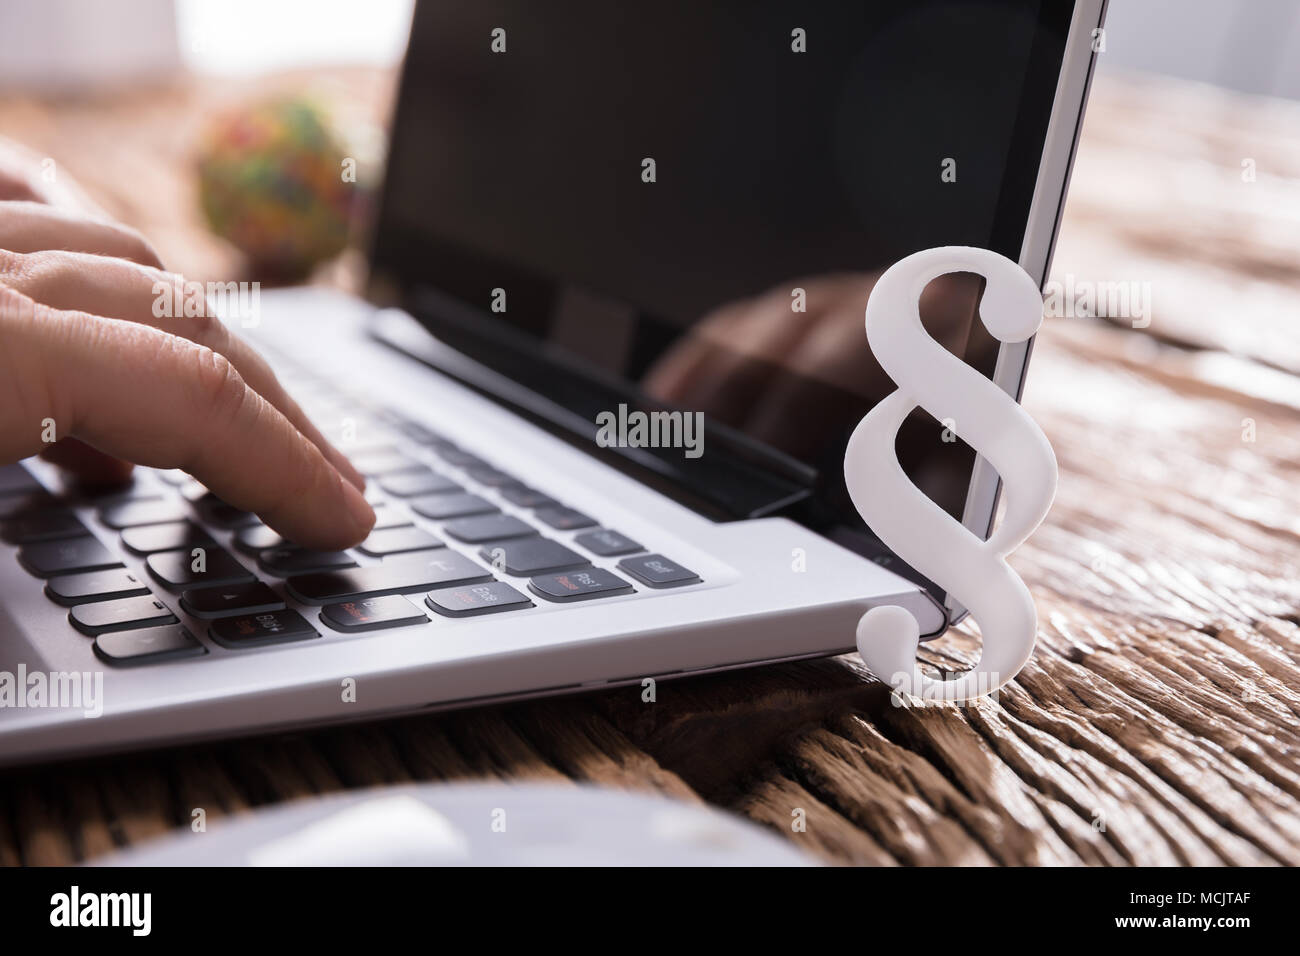 Businessperson's Hand Using Laptop With Paragraph Symbol On Wooden Desk Stock Photo